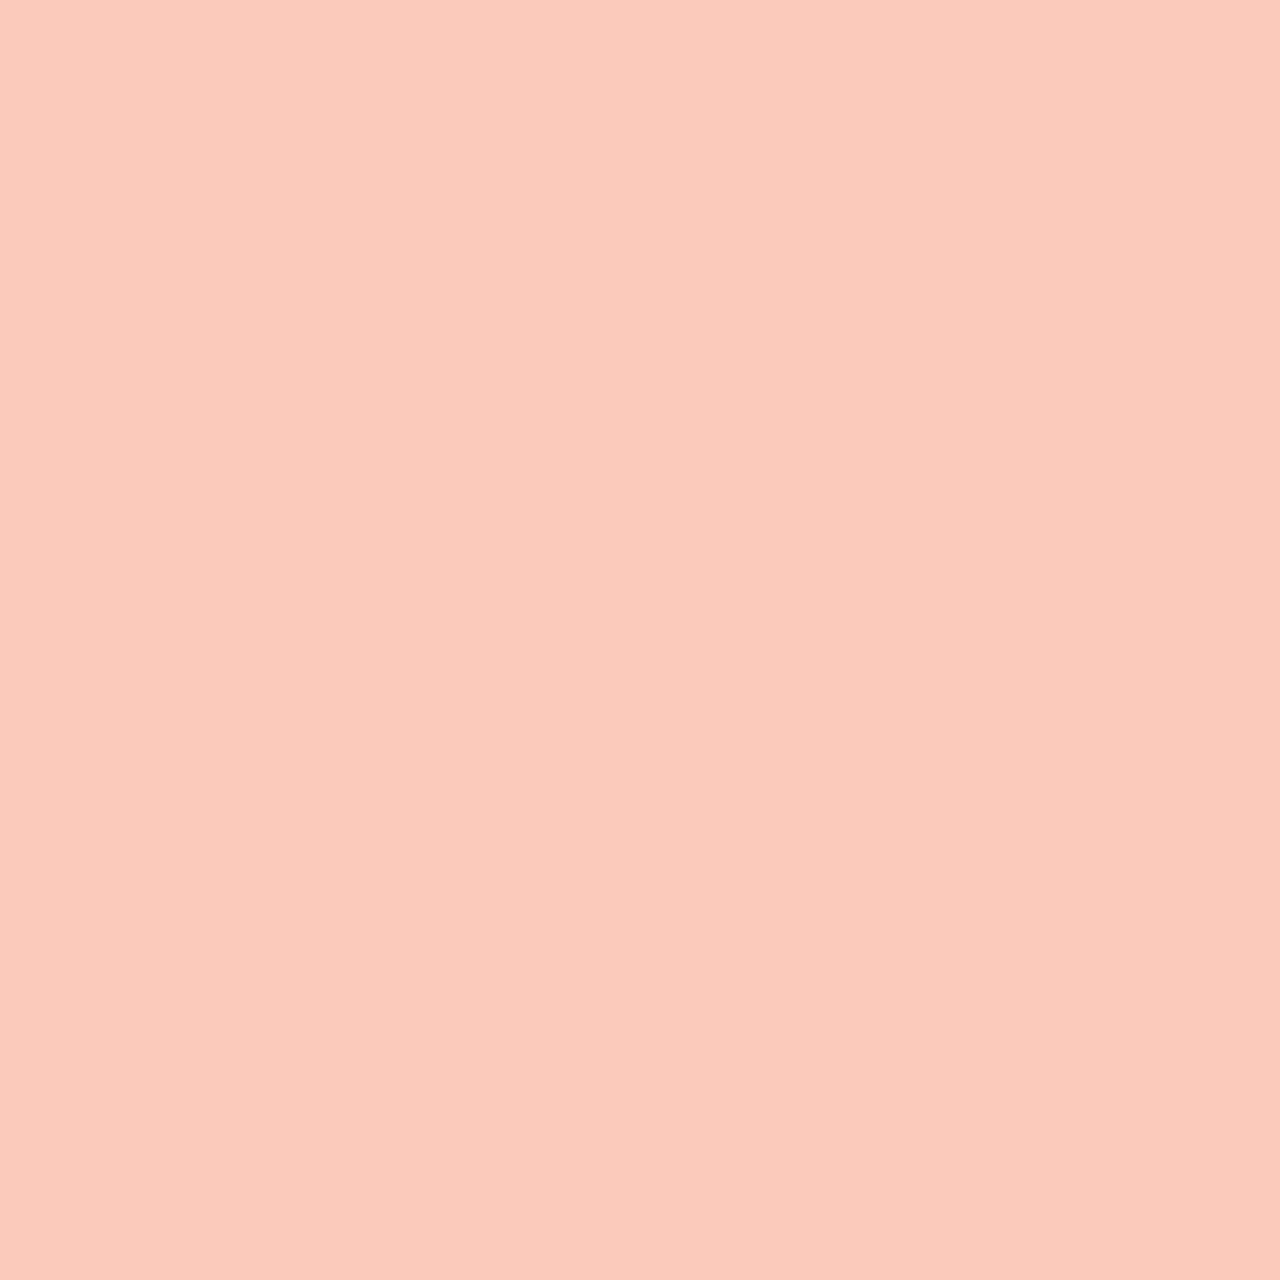 Pale Pink 121-048 PBS Fabrics Painter's Palette Solids collection